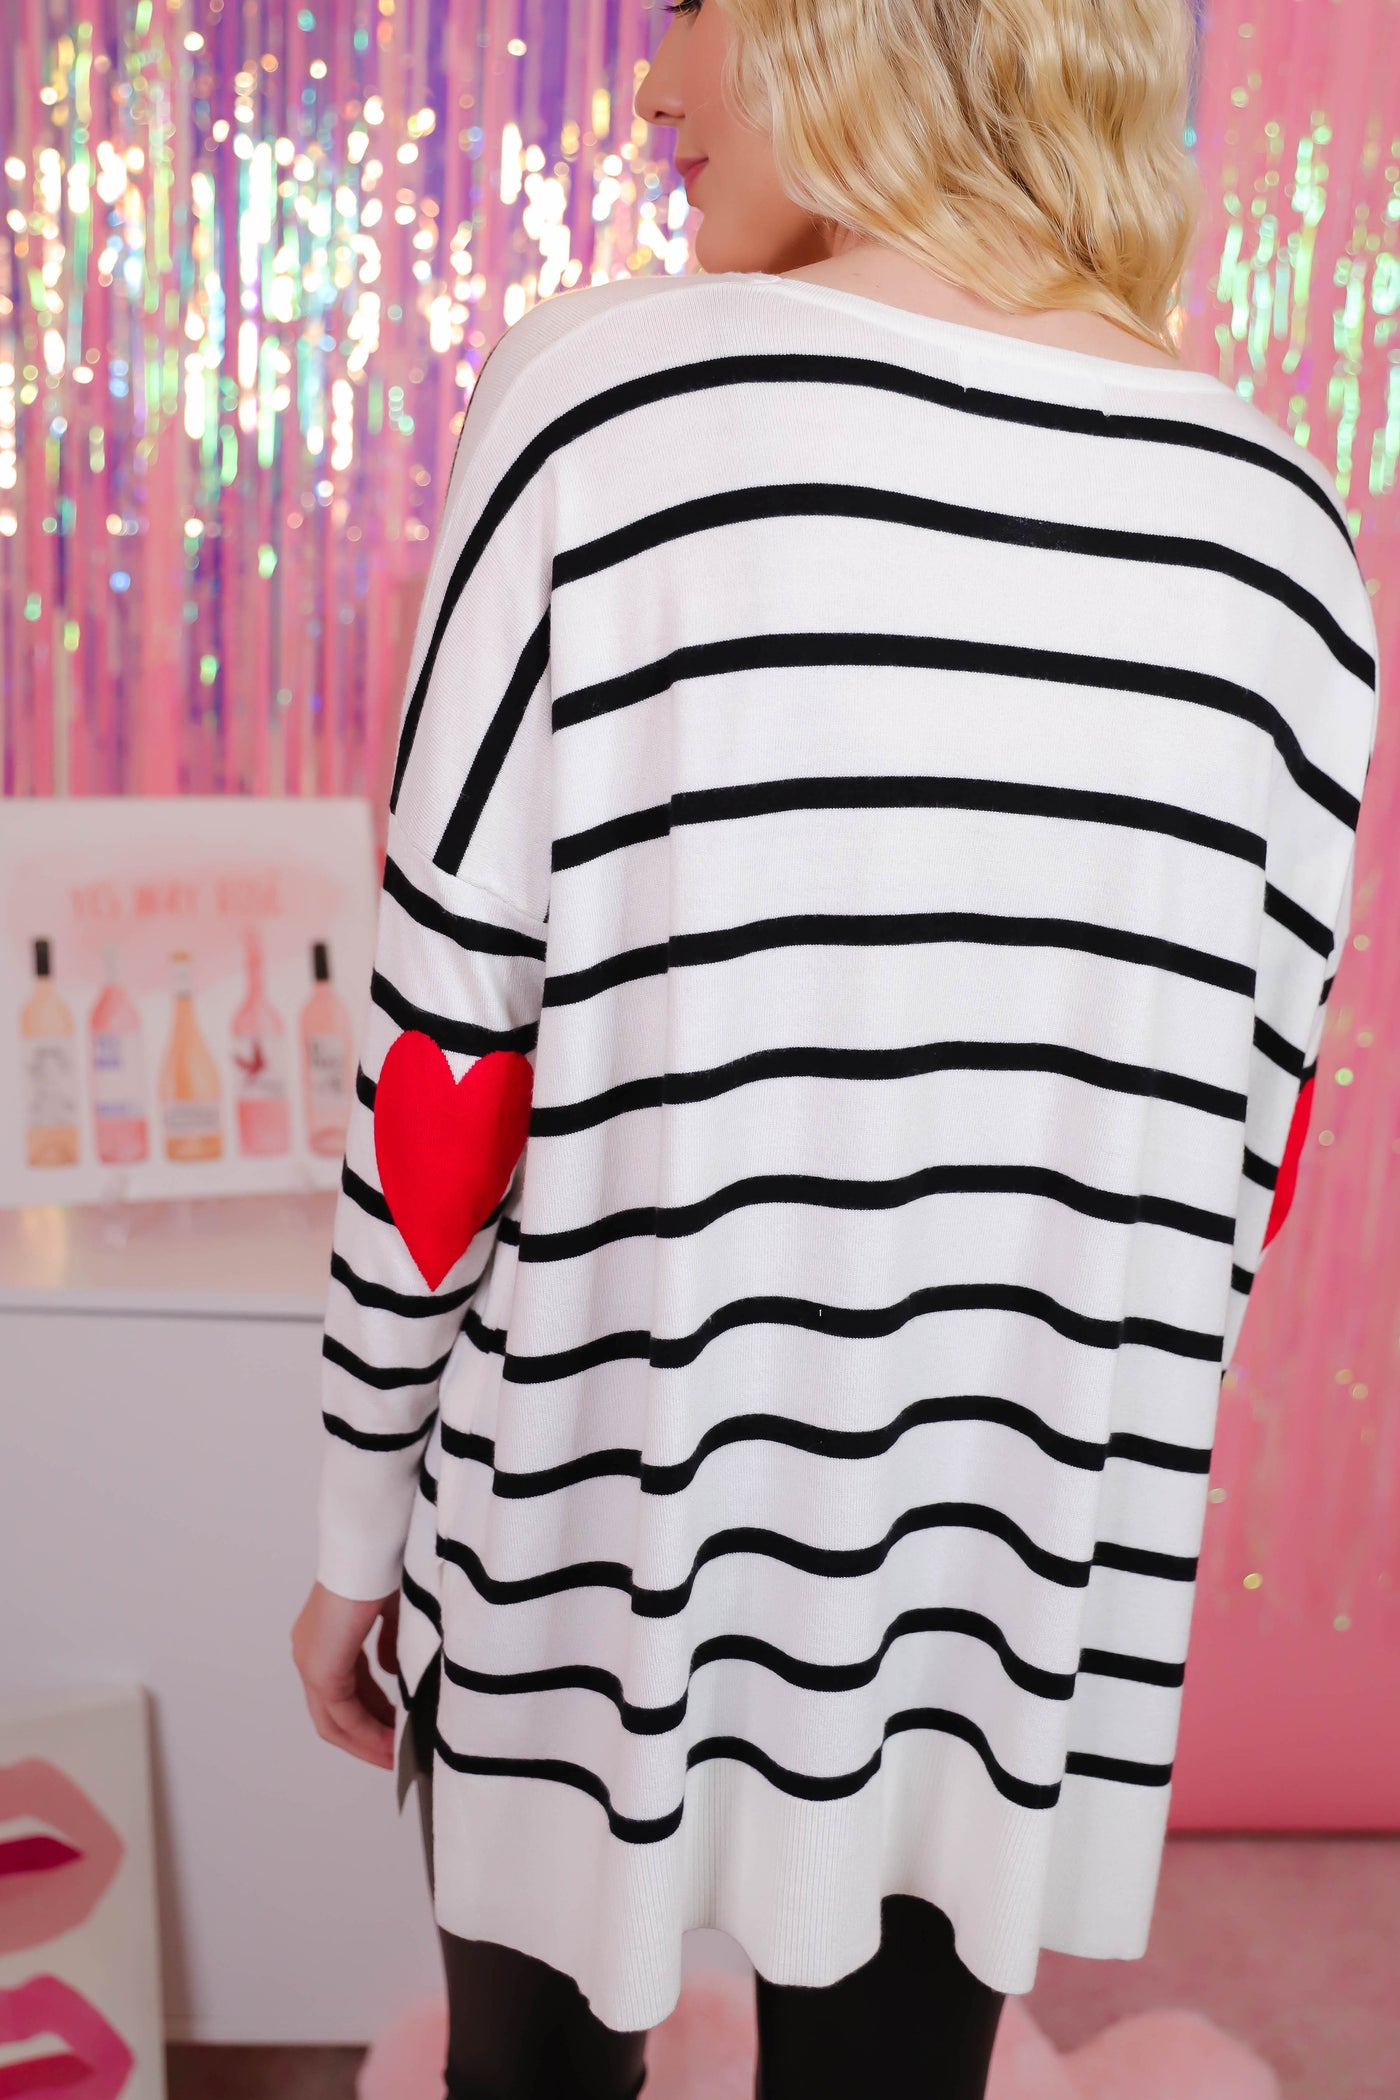 Black and White Striped Sweater with Heart Shaped Elbow Patches- Striped Sweater with Elbow Patches- Preppy Sweater